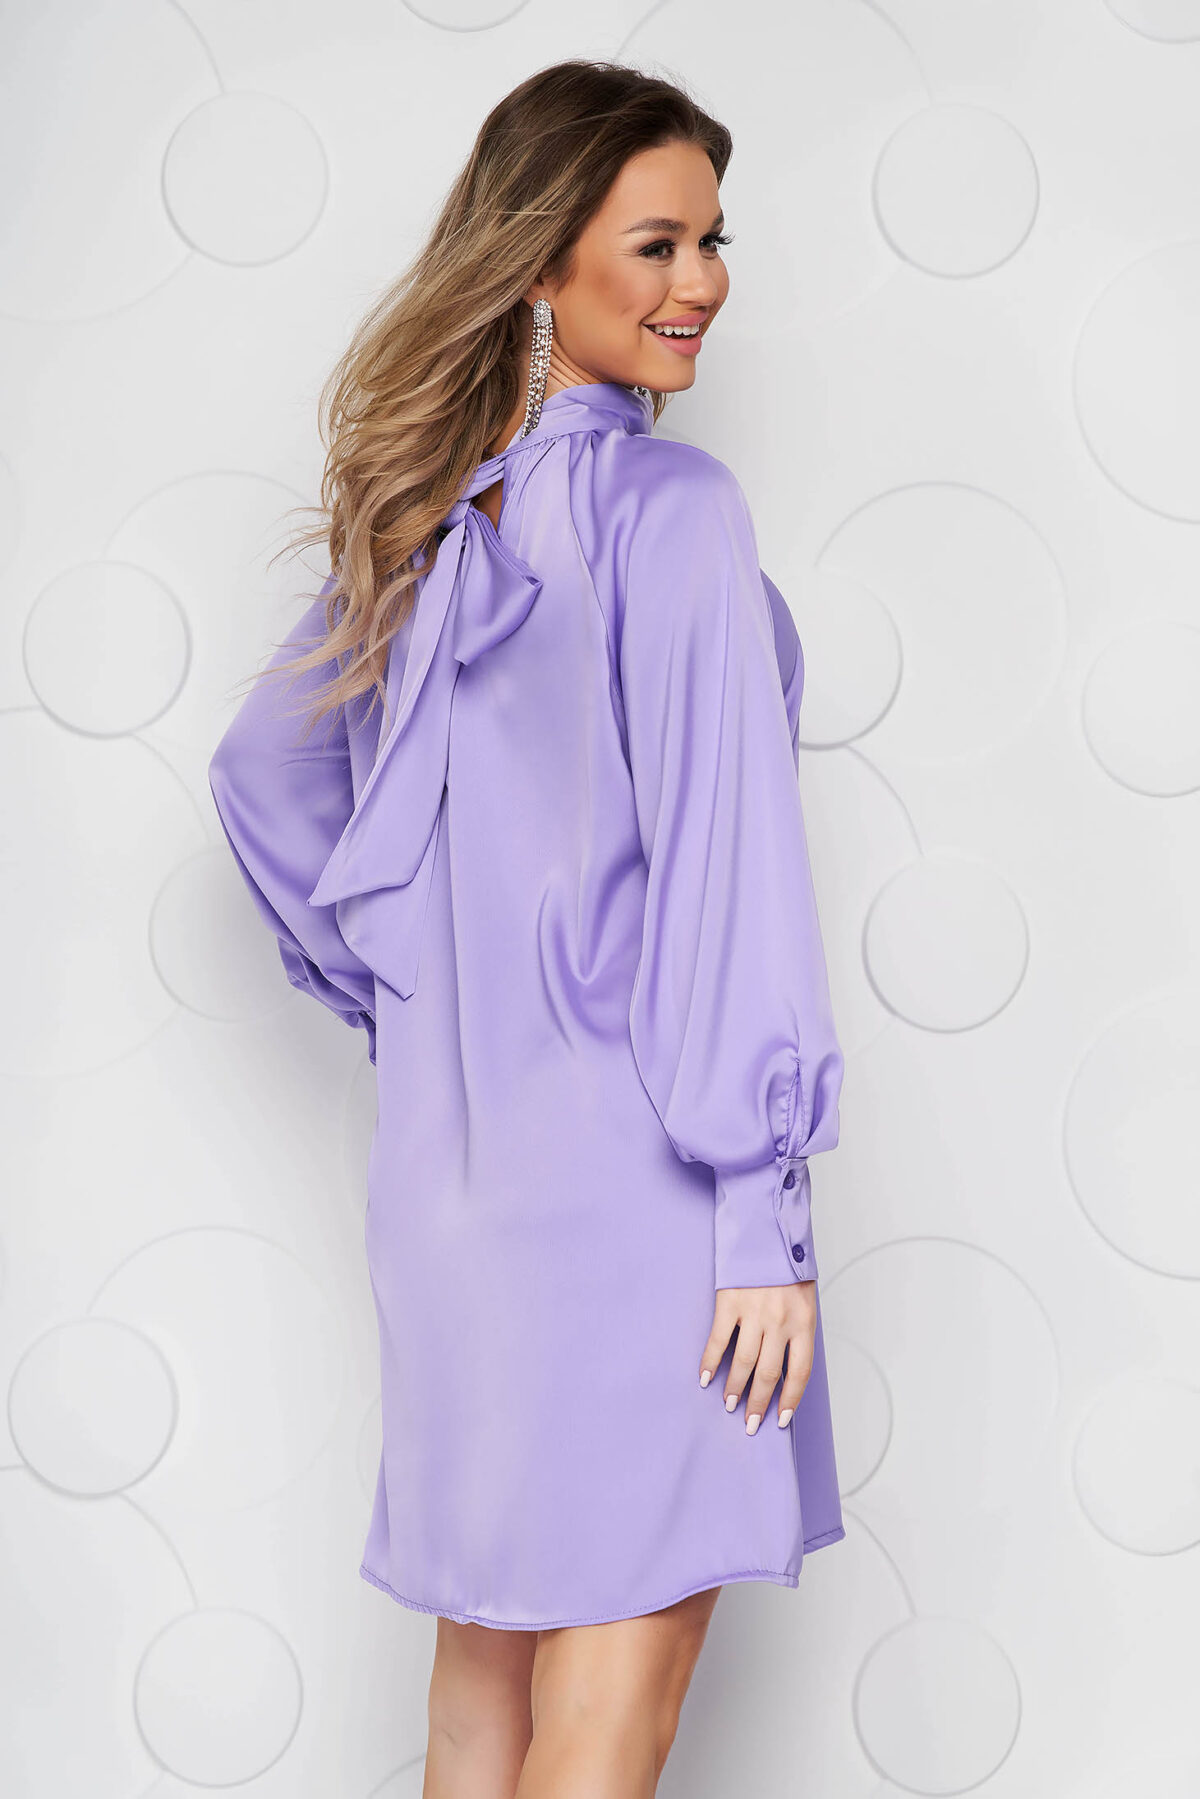 Lila Dress From Satin With Puffed Sleeves Loose Fit Bow Accessory